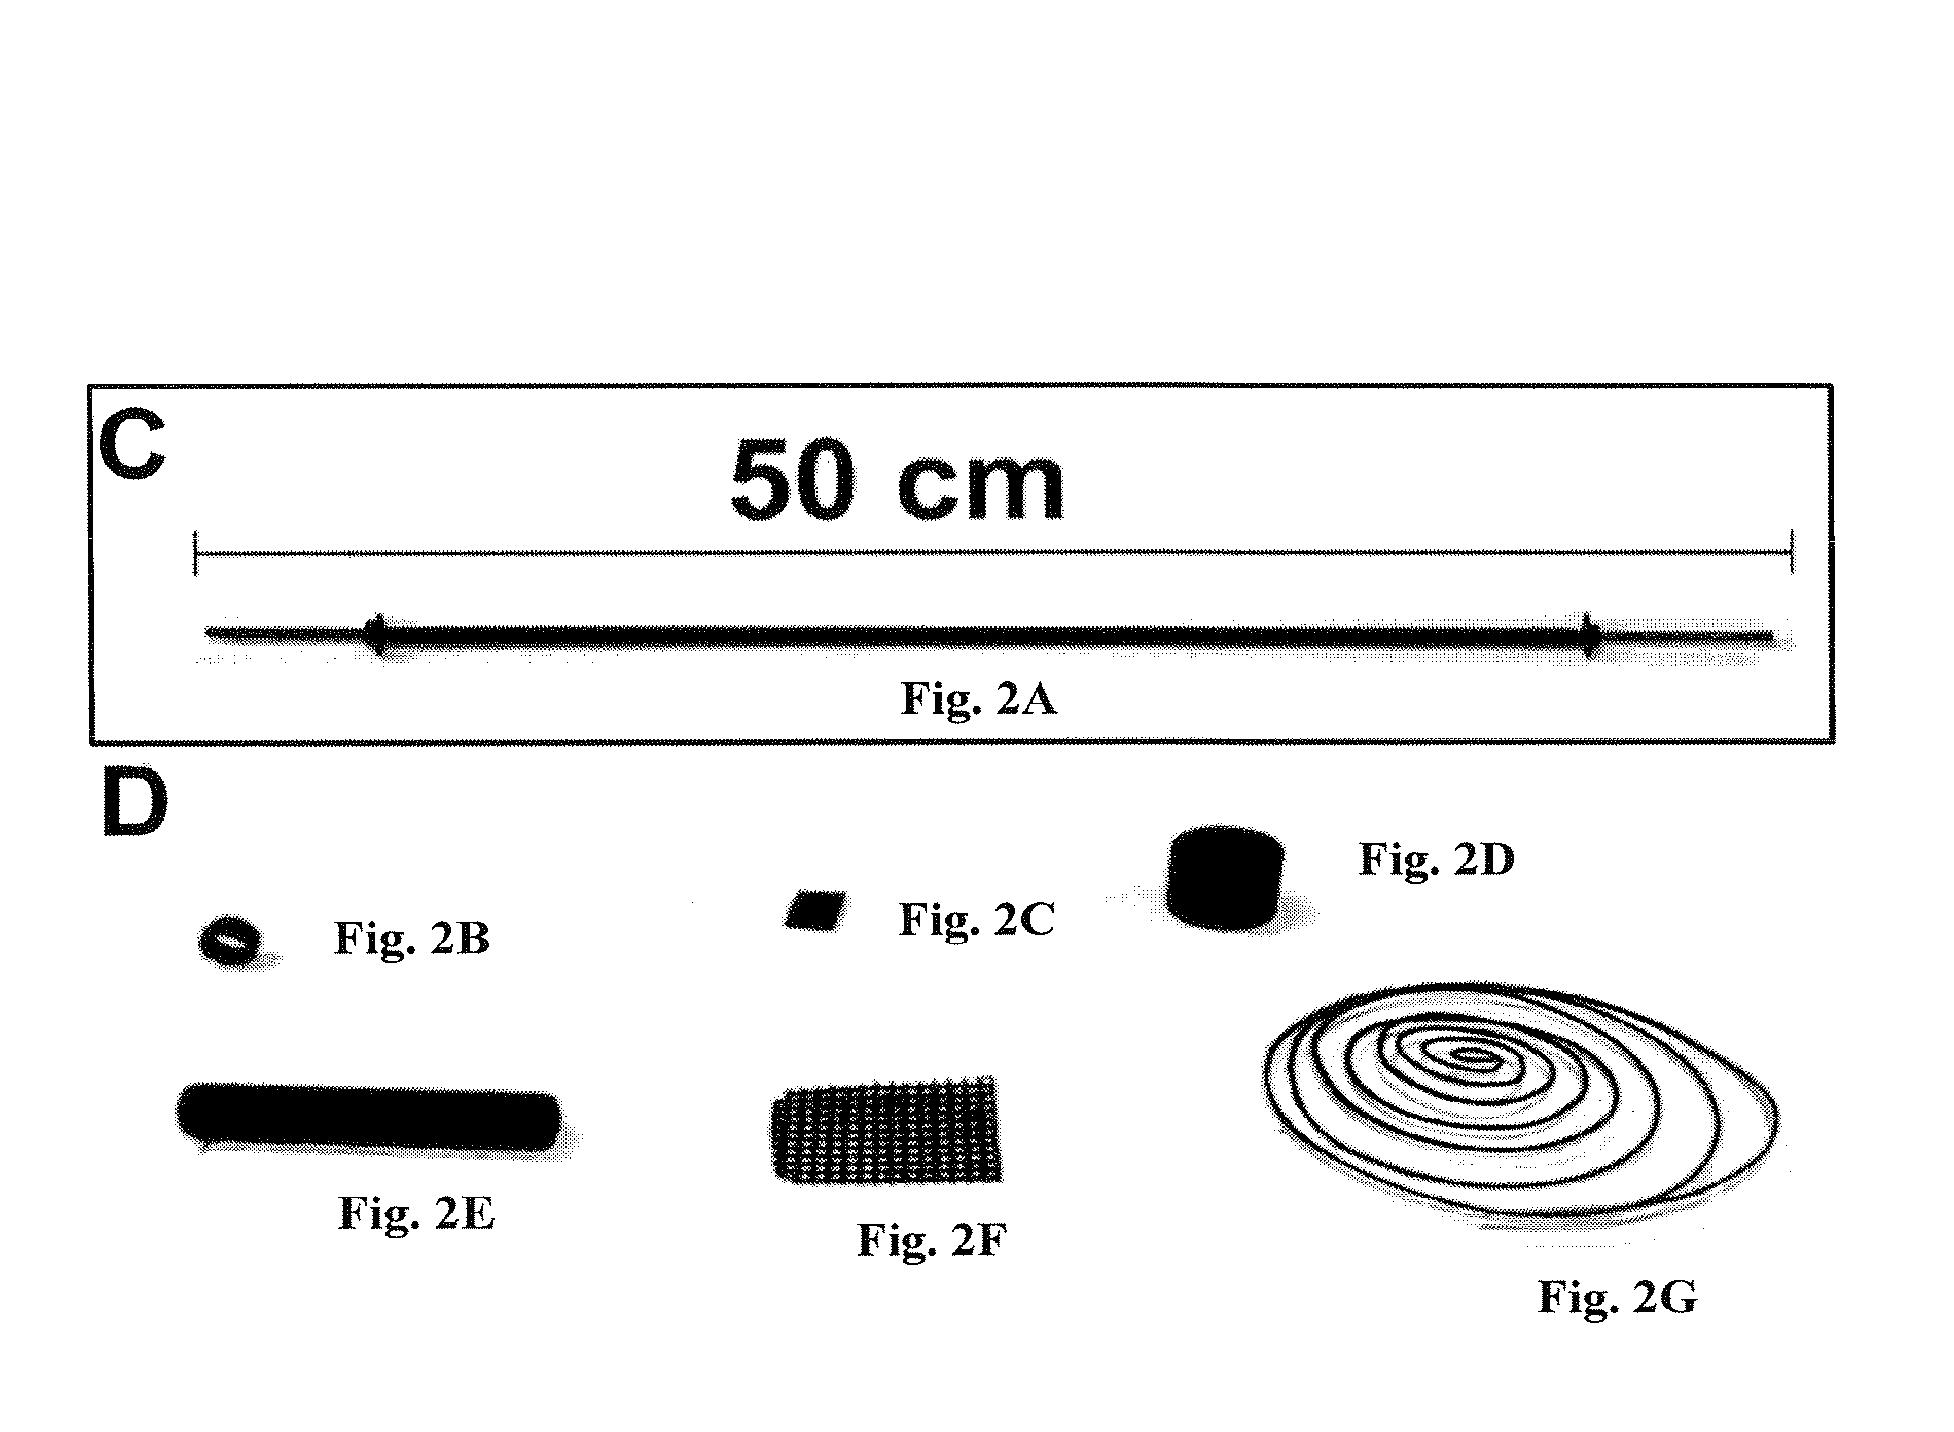 Hydrophobic surface coating systems and methods for metals